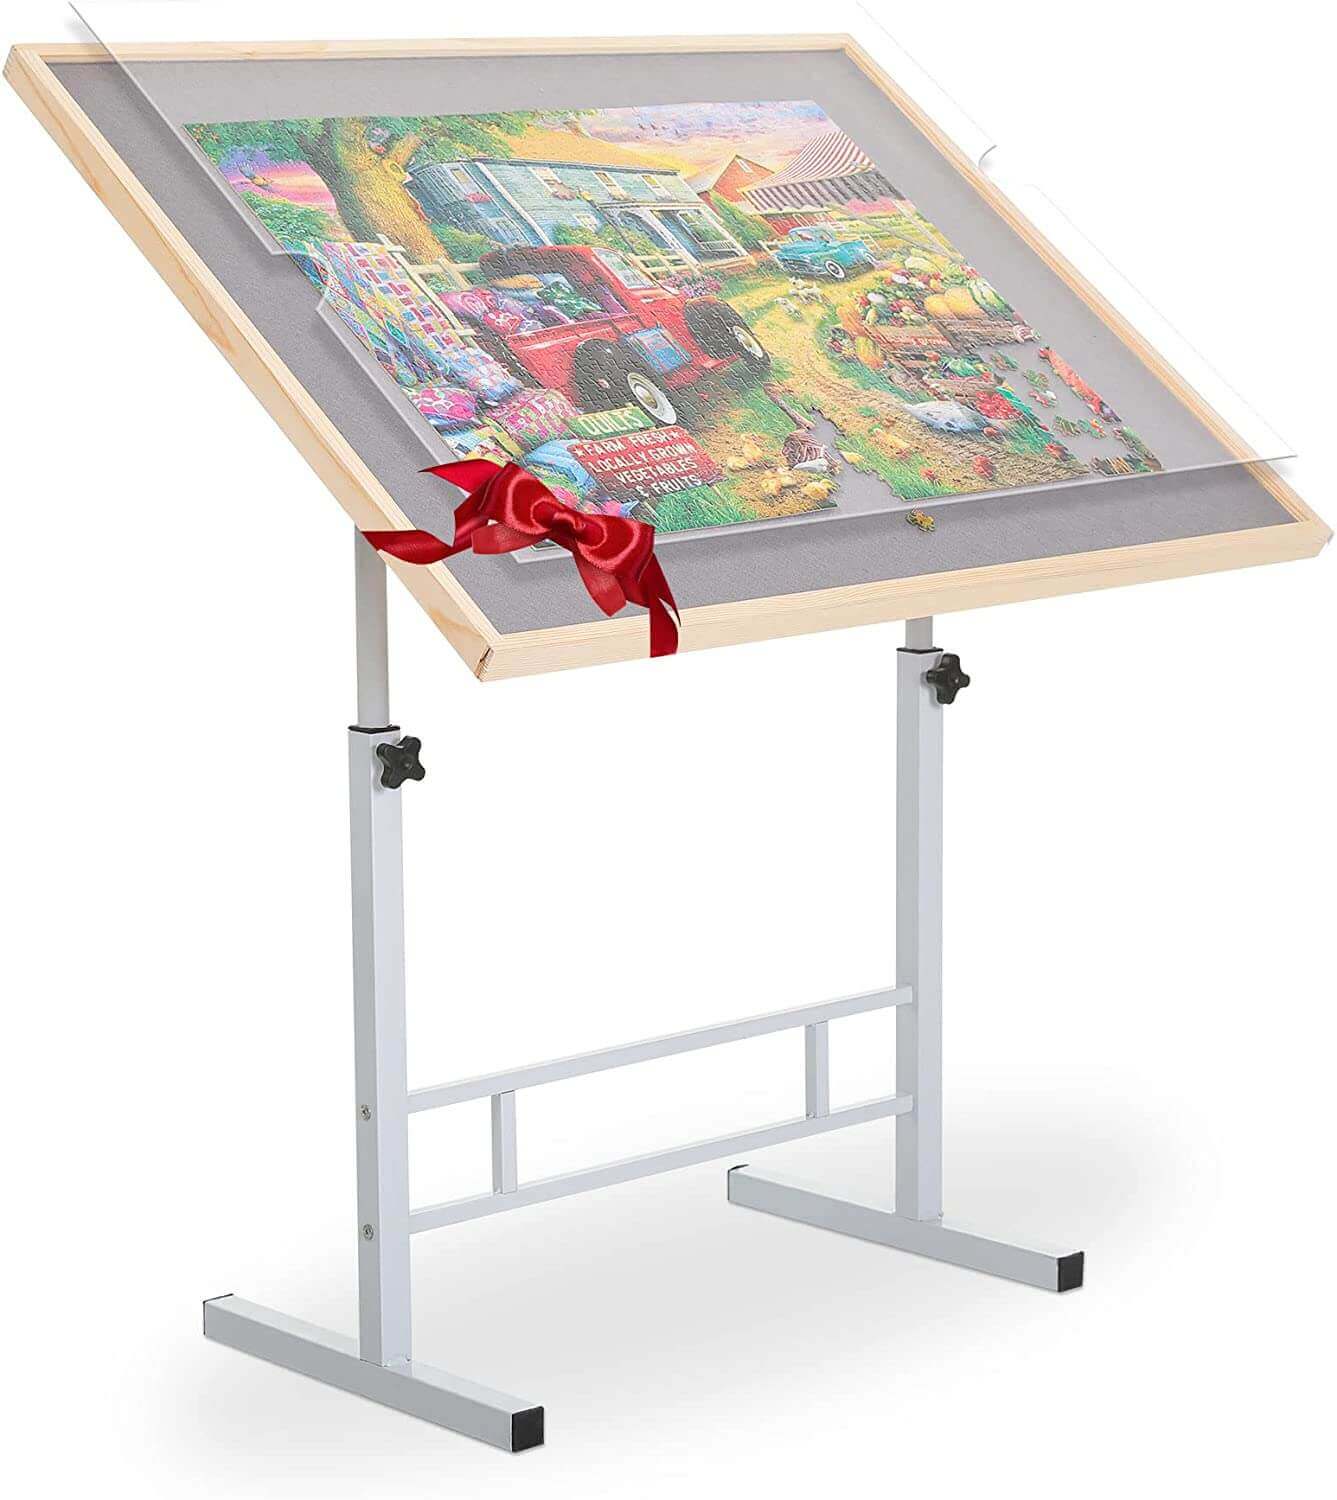 Fanwer Jigsaw Puzzle Tables with Drawers and Legs 1500 Pieces 34